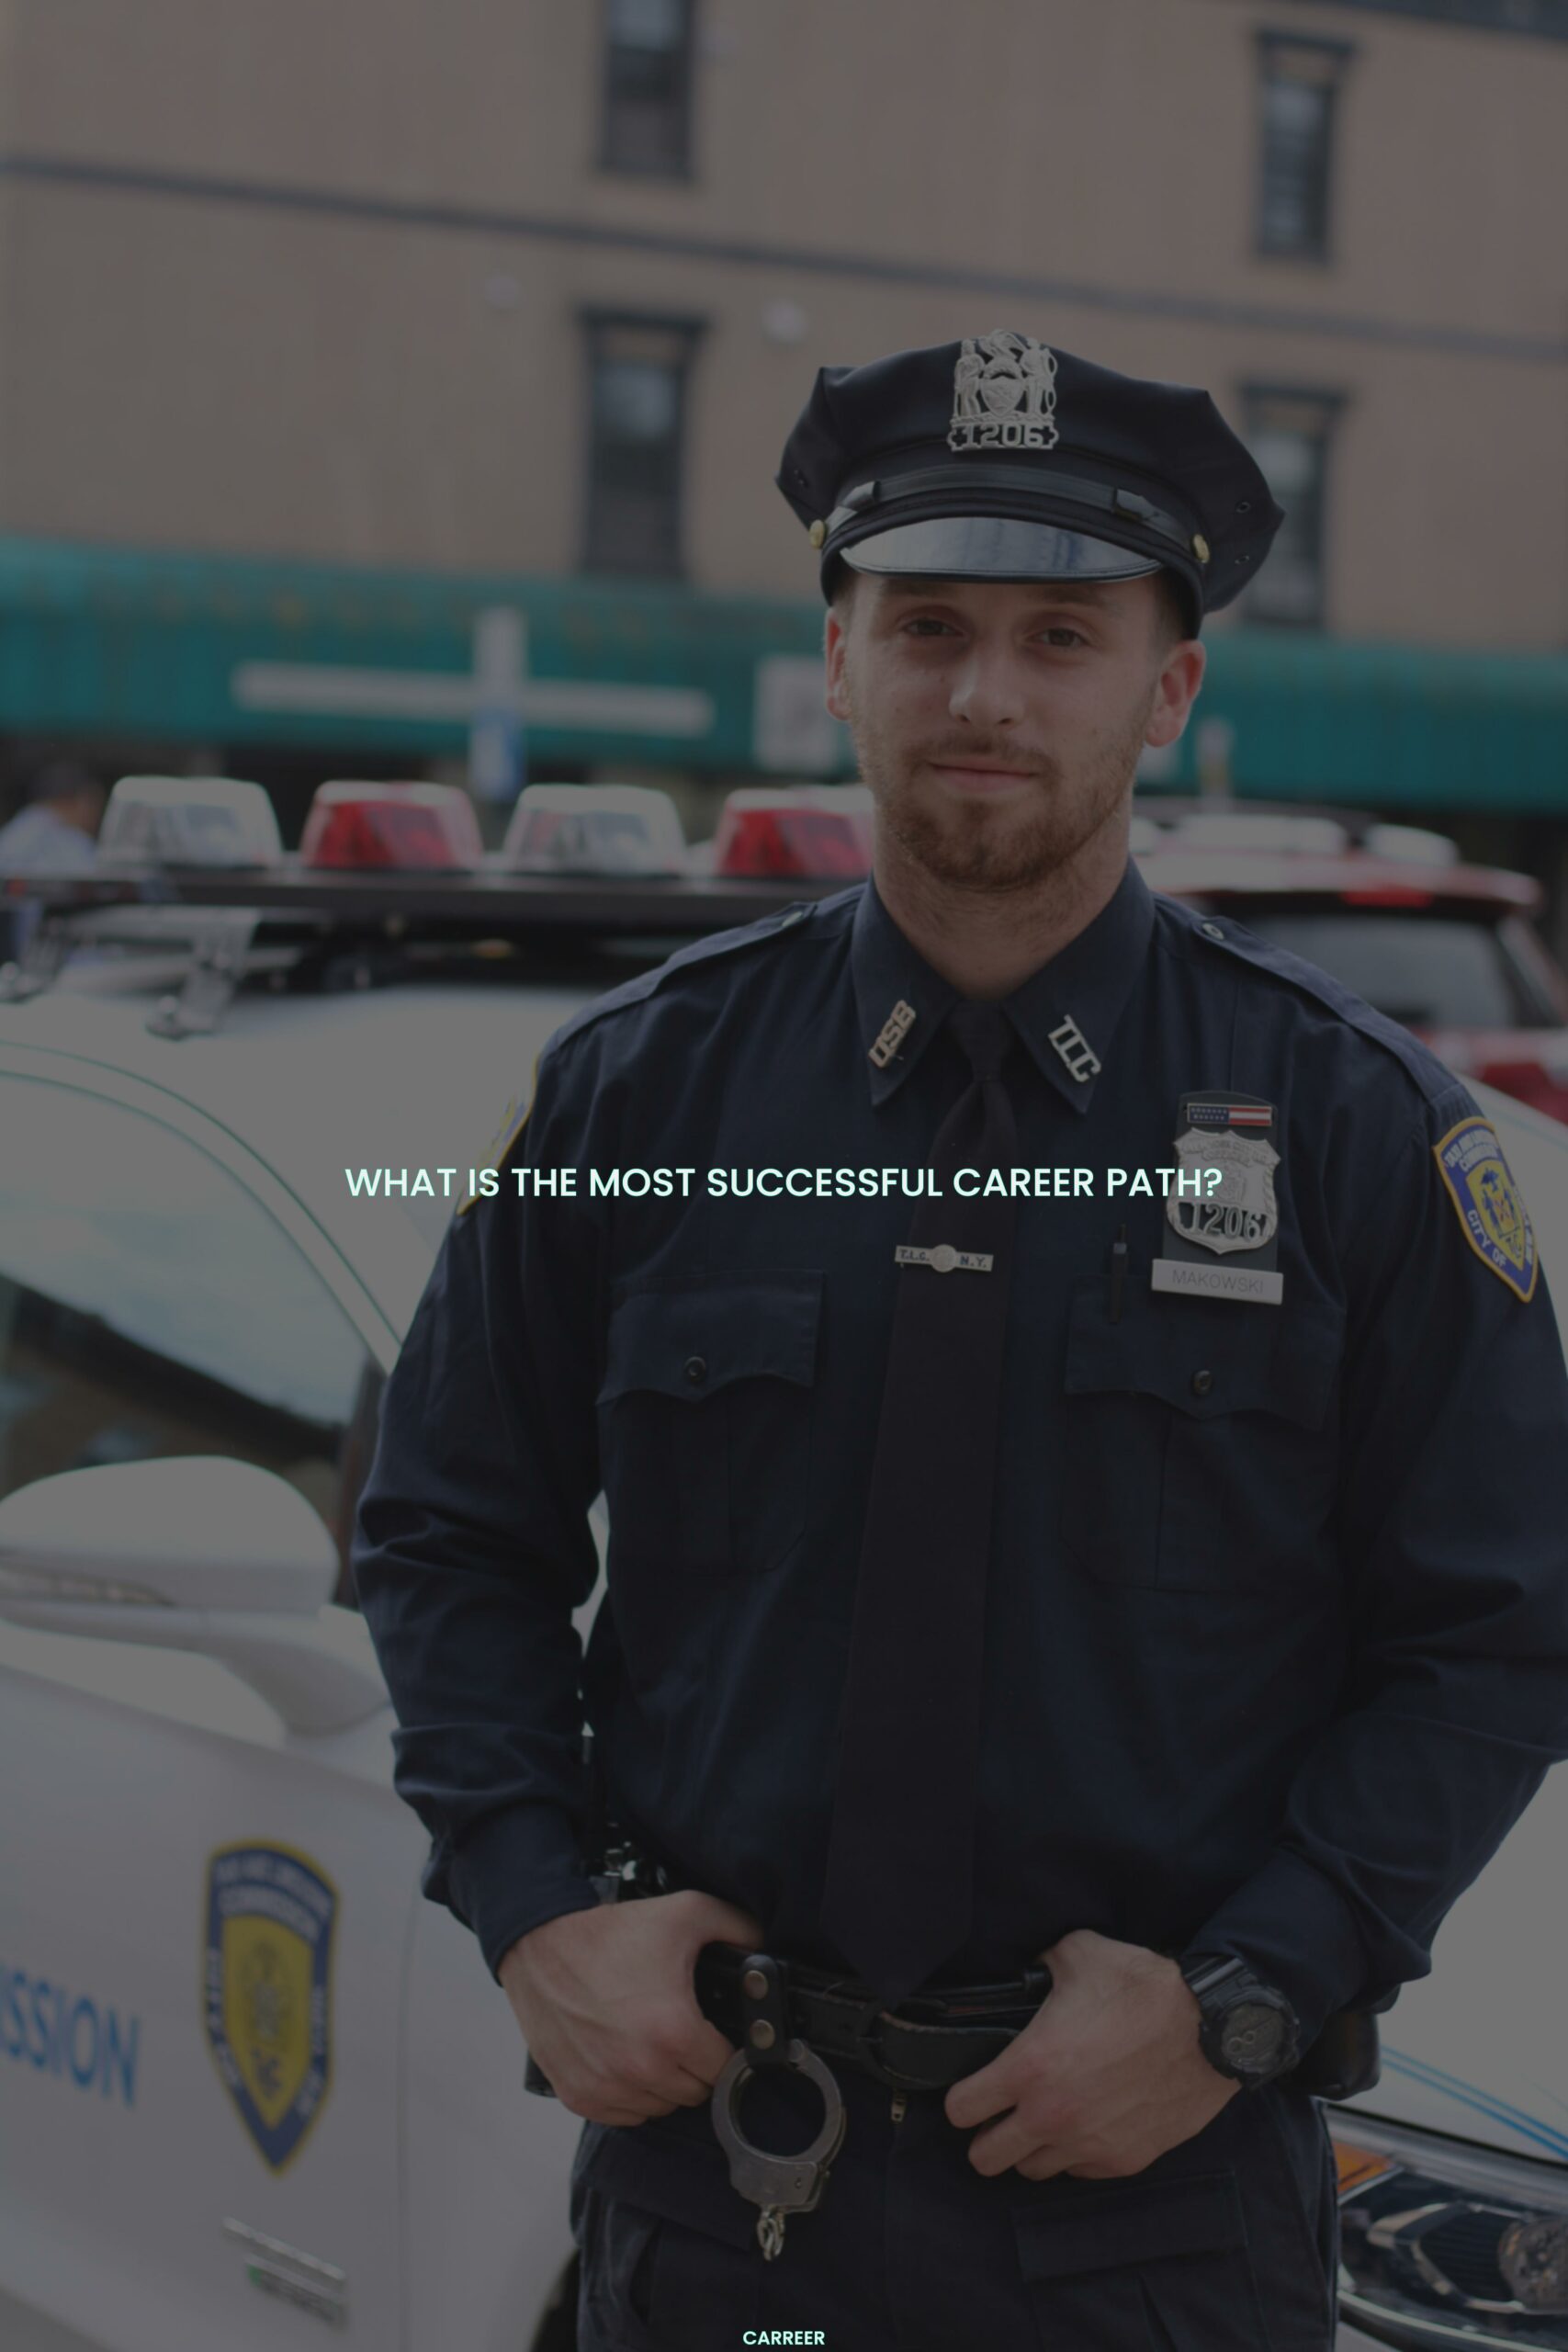 What is the most successful career path?